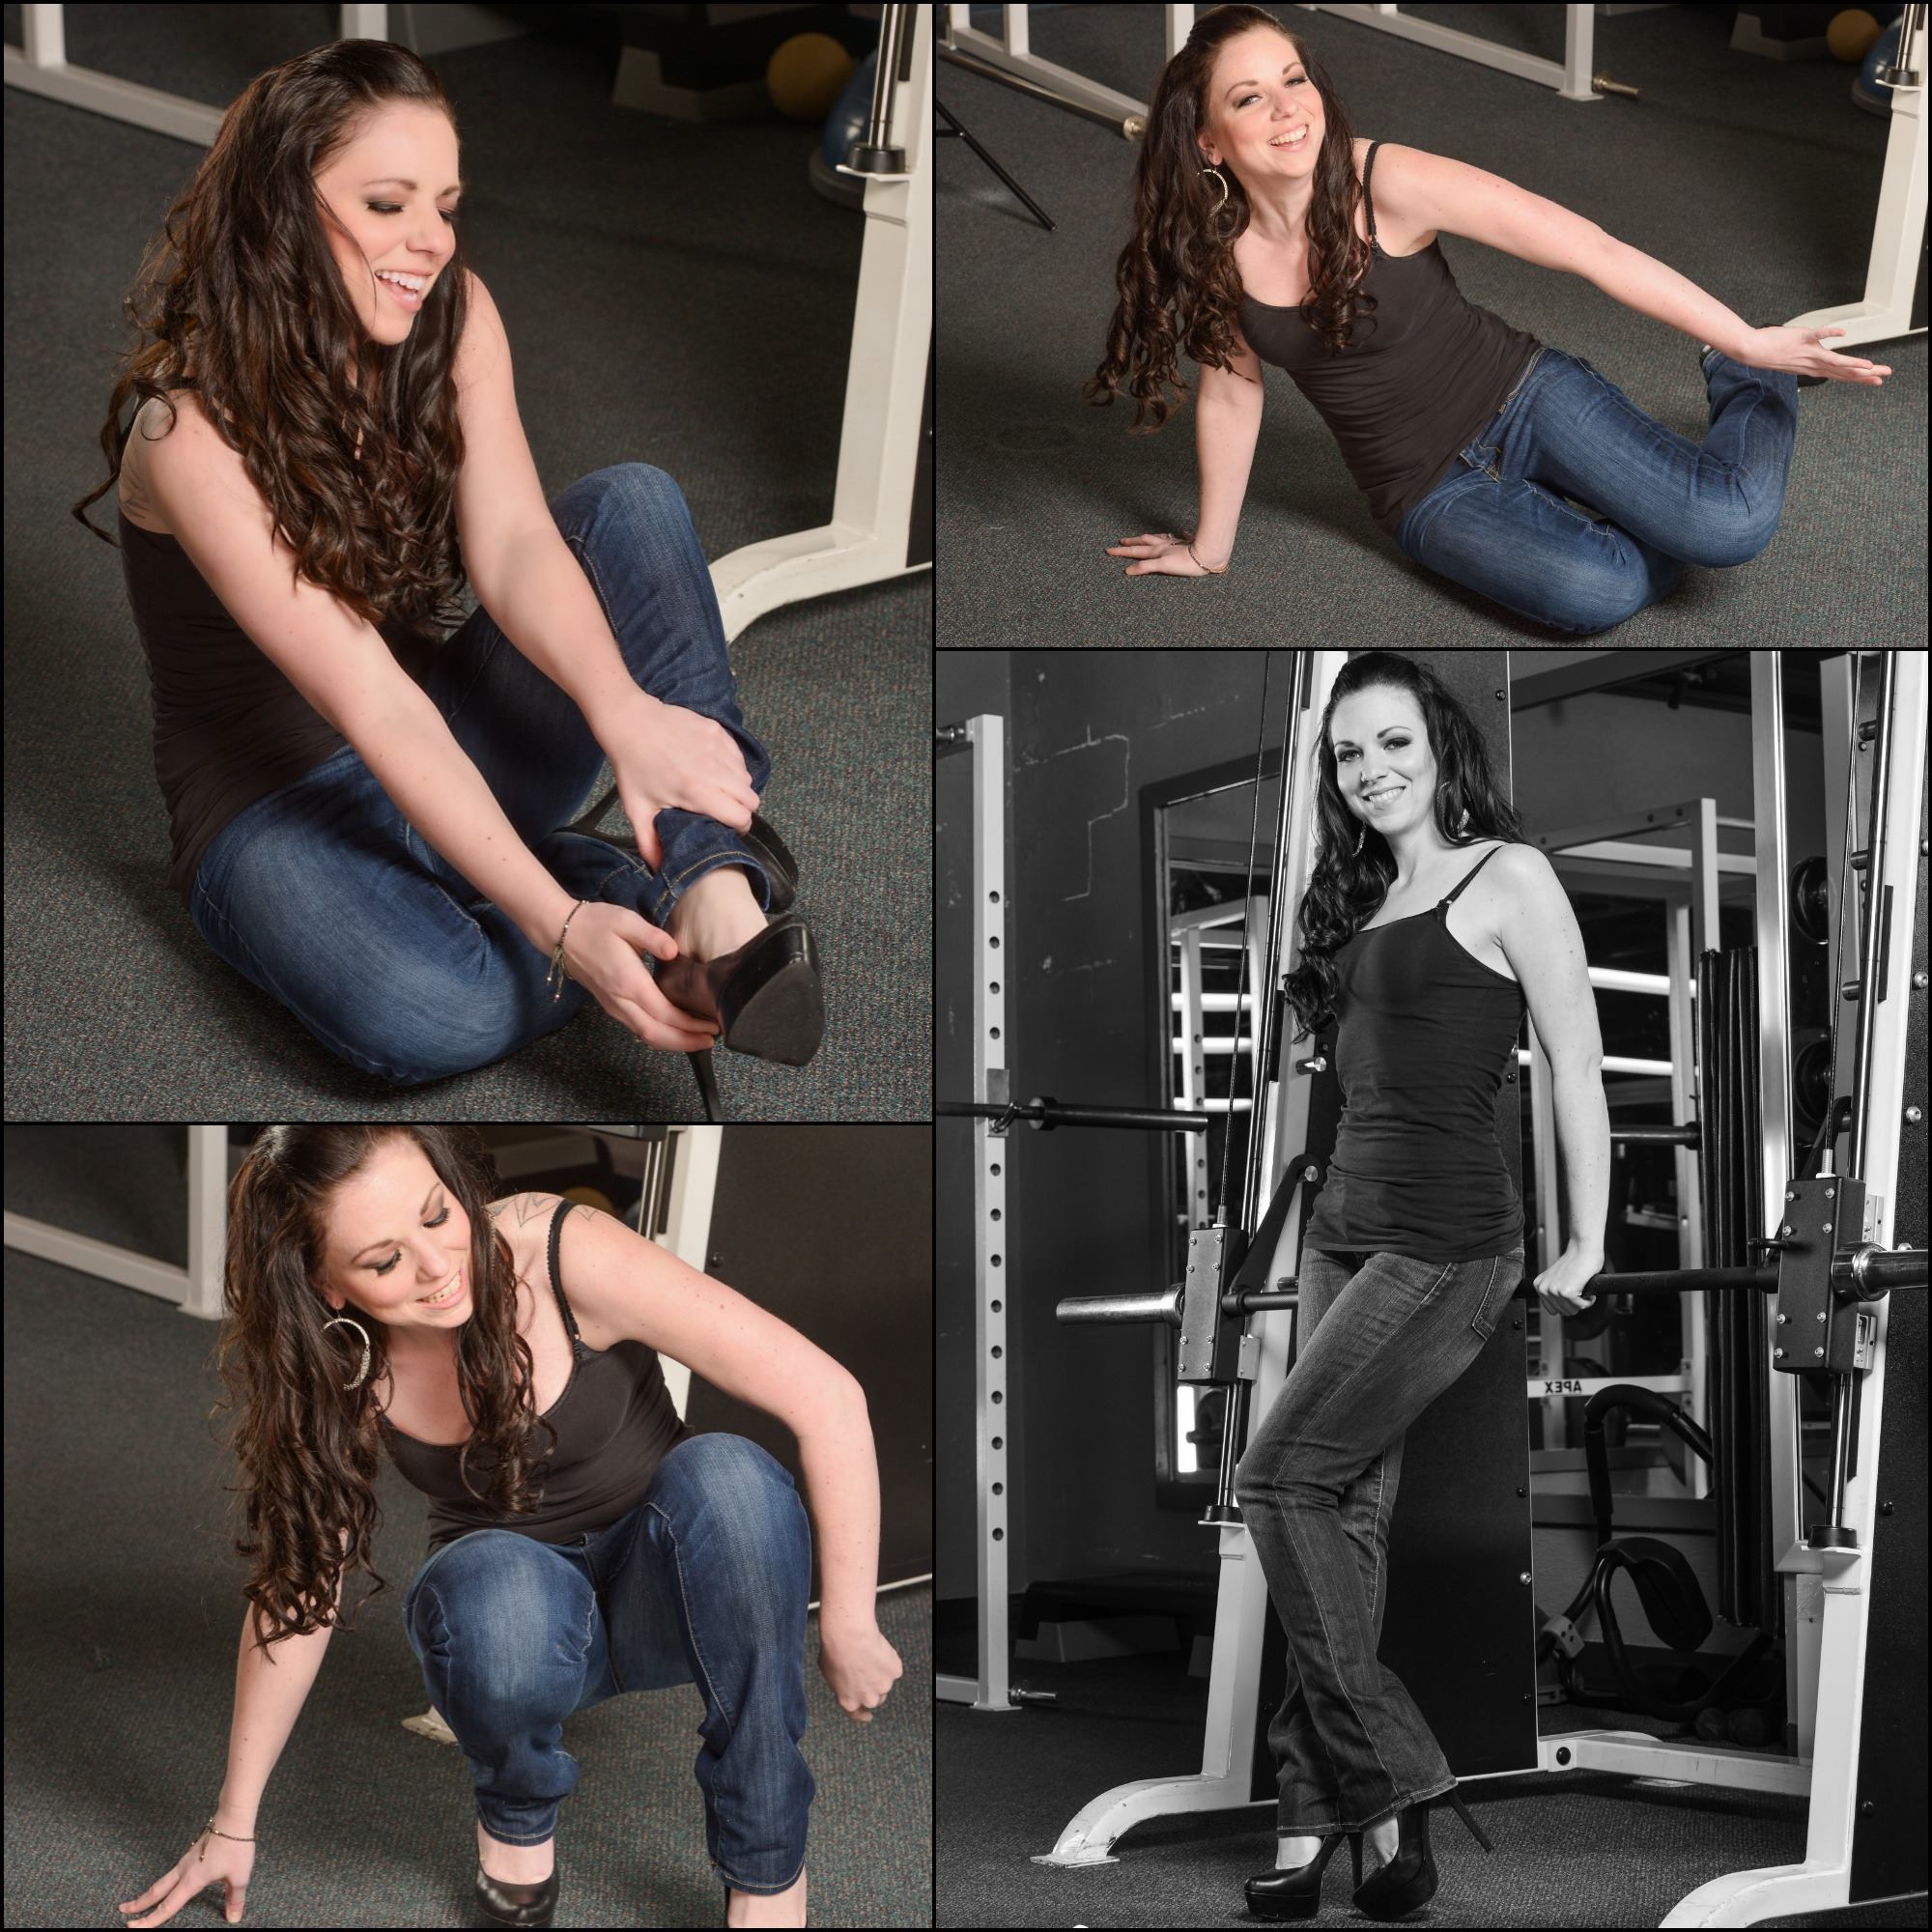 How to Rock a Photo Shoot in 5 Easy Steps